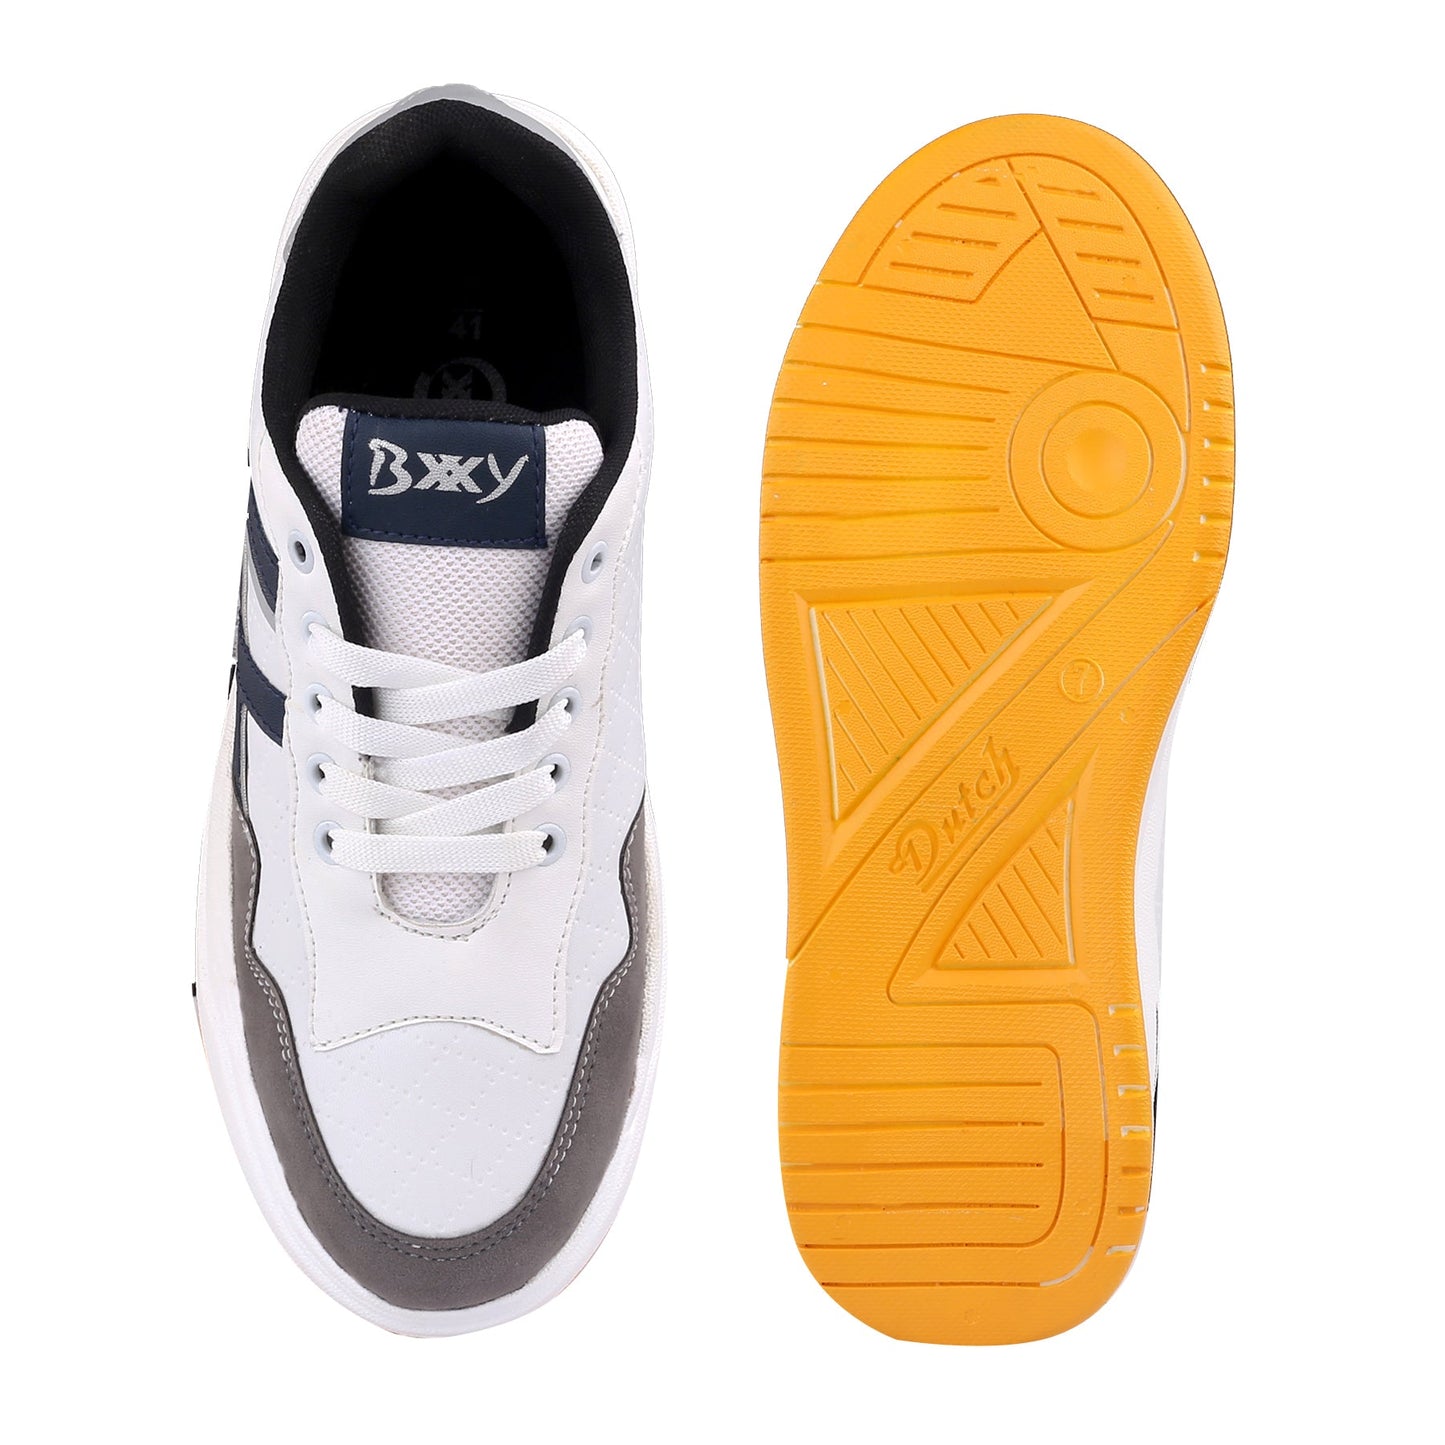 Bxxy's Sports Casual Shoes for Men